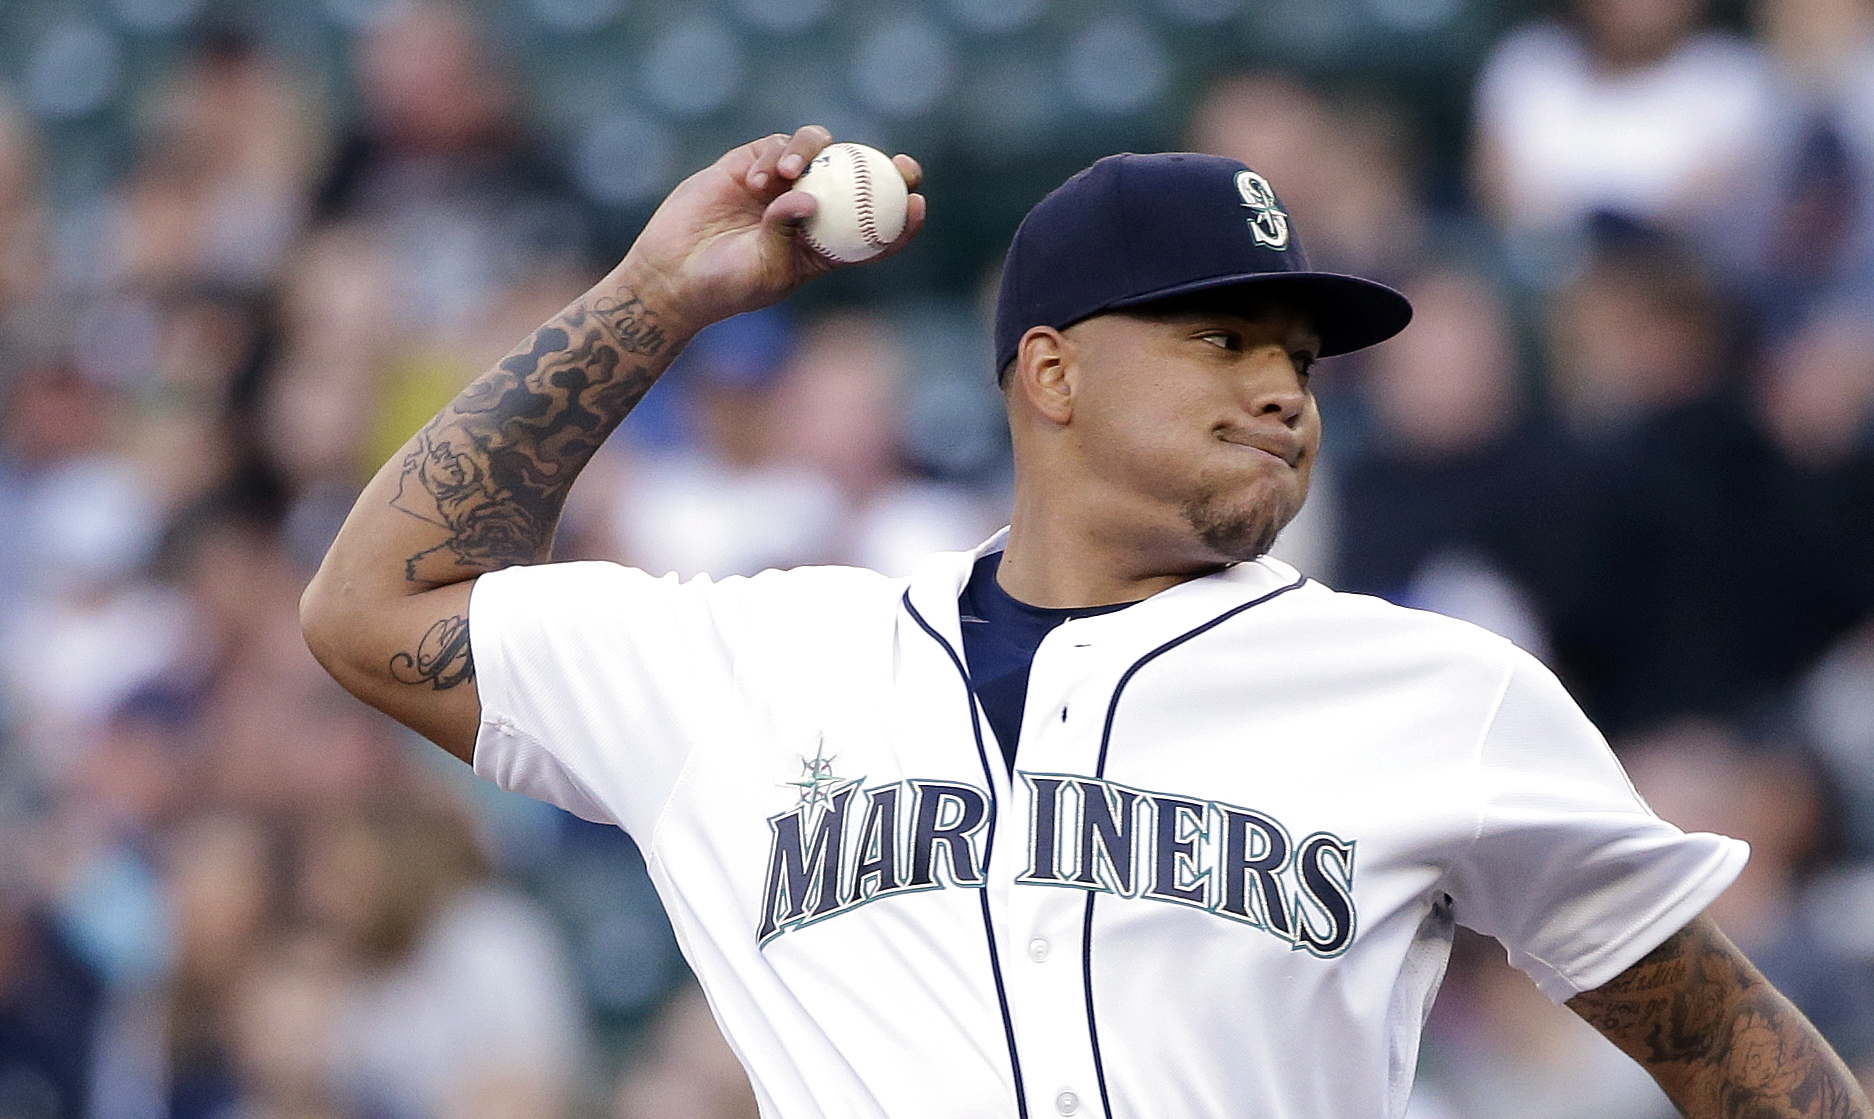 Seattle Mariners starting pitcher Taijuan Walker throws against the Baltimore Orioles during the first inning of a baseball game Thursday, June 30, 2016, in Seattle.